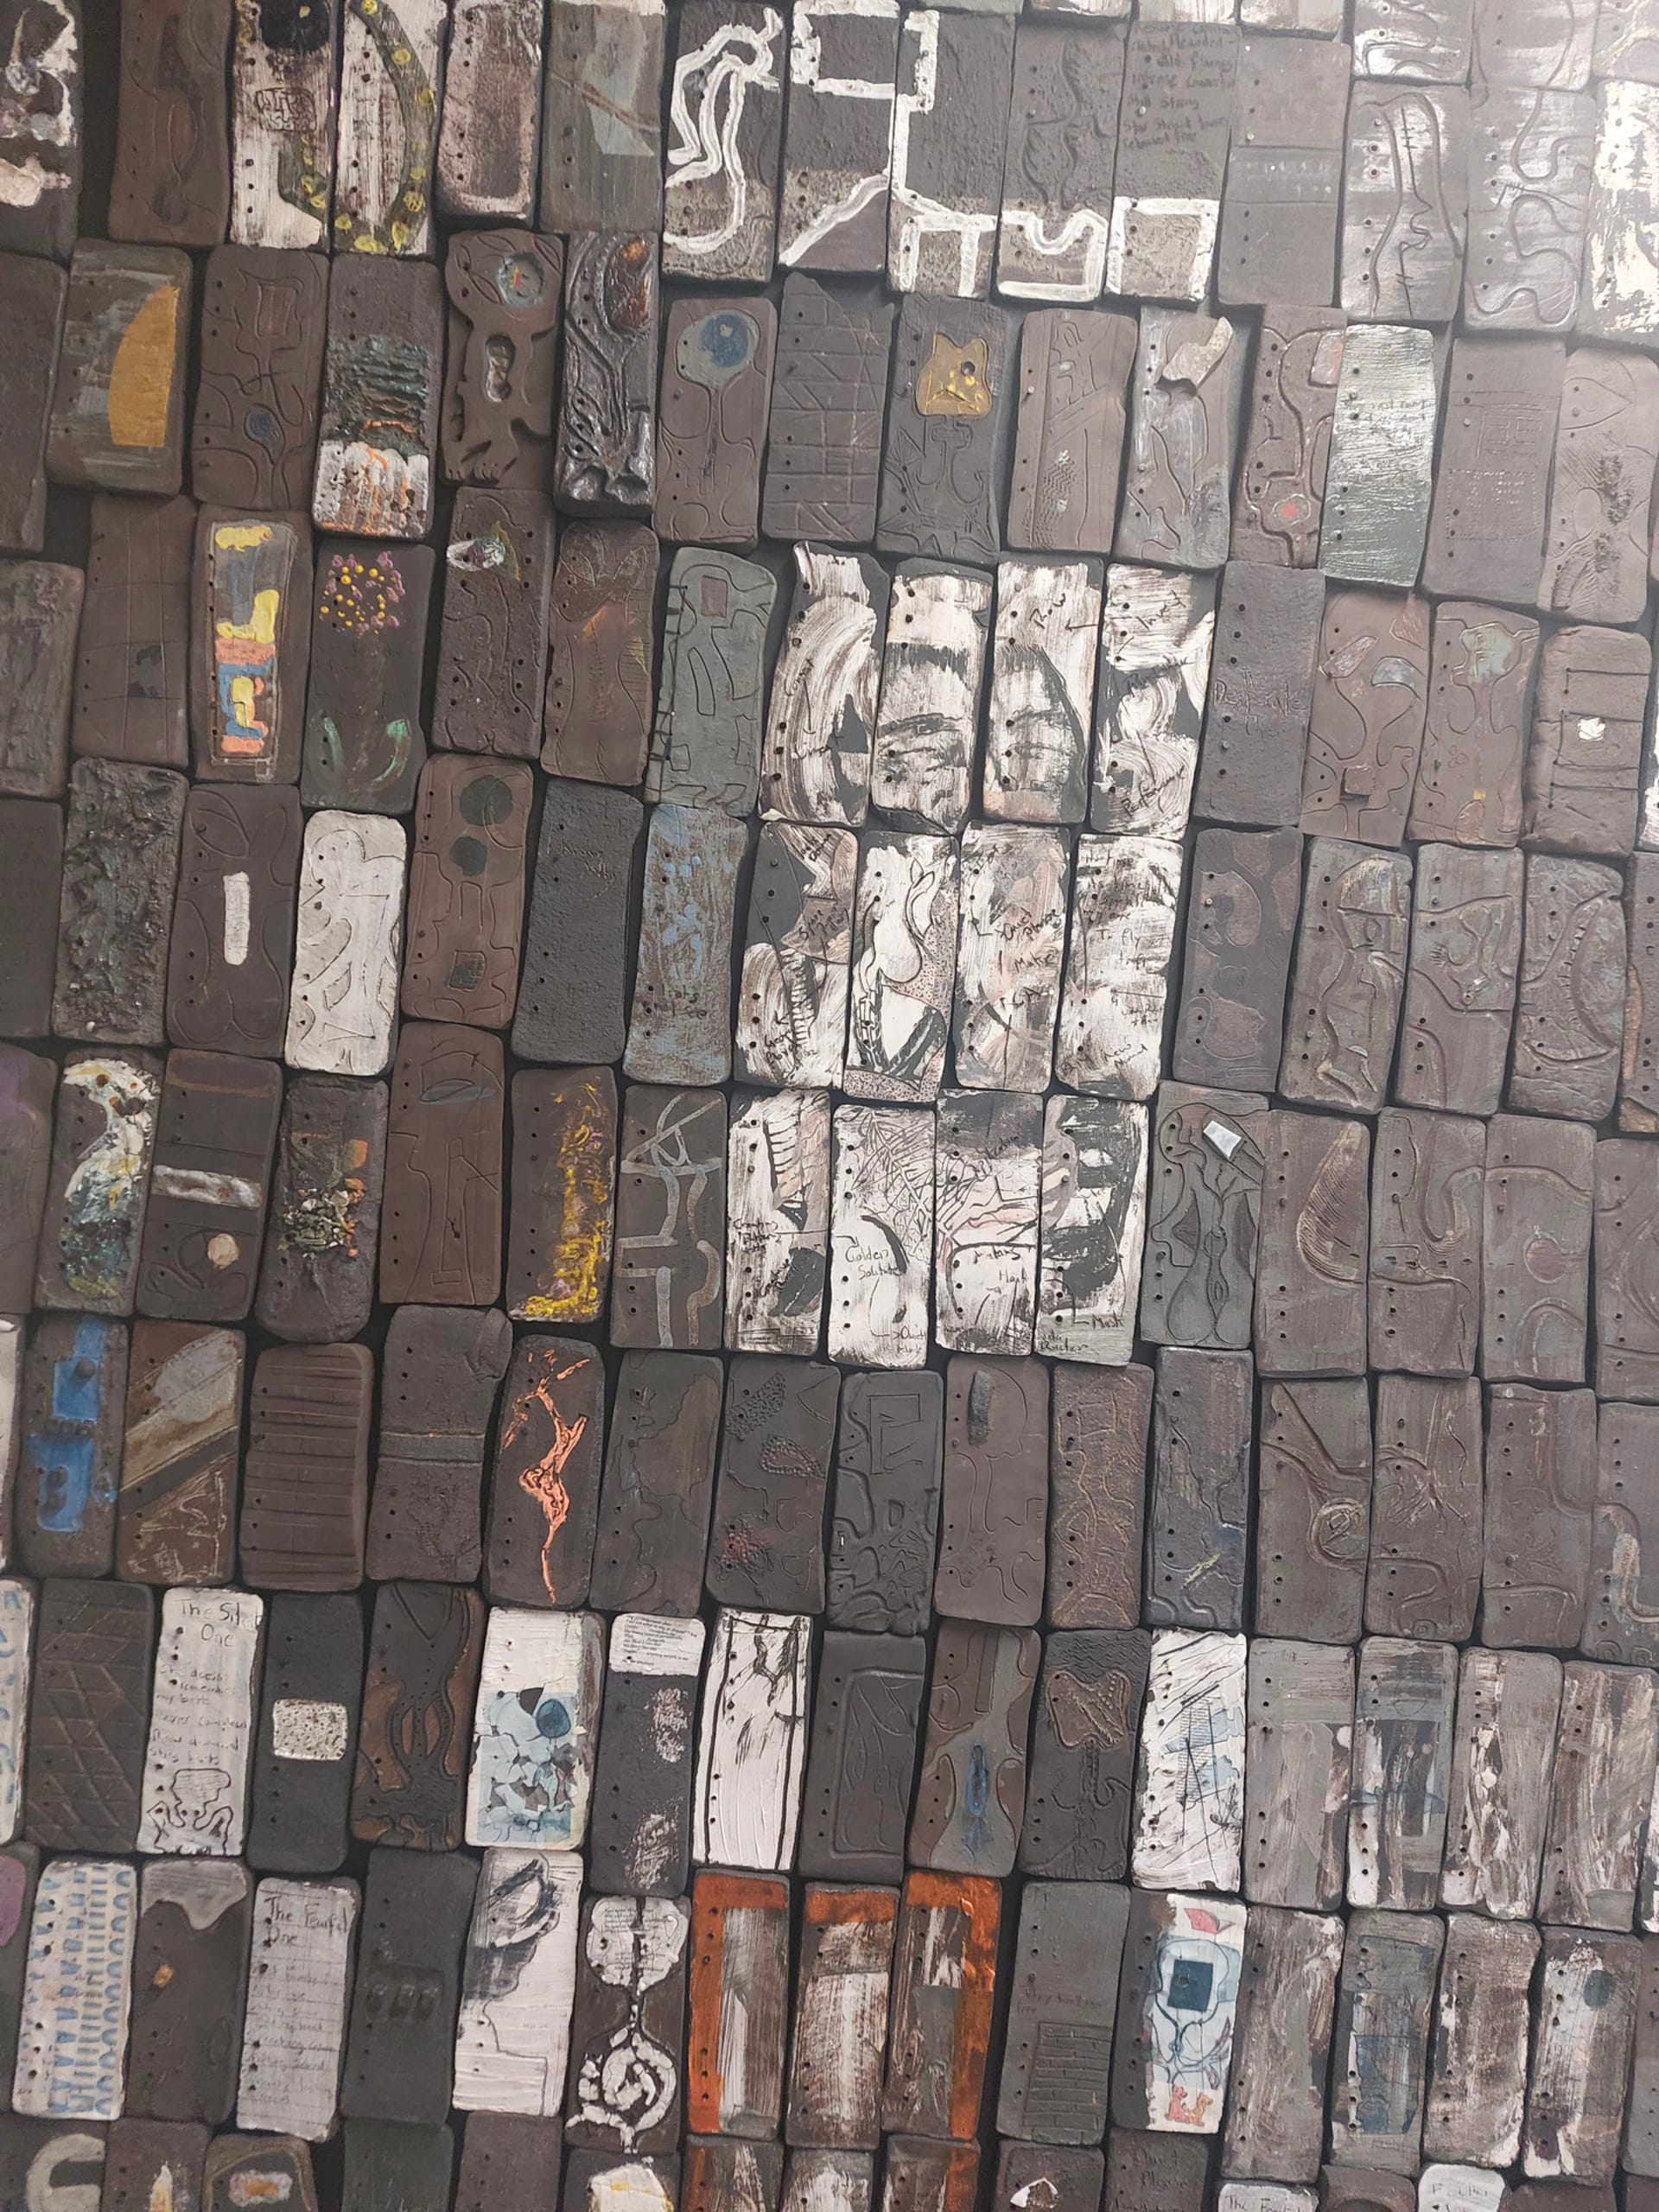 Image of many slightly wonky, brown rectangular bricks, all with different images carved, drawn or painted on them, laid together like a wall or paving.